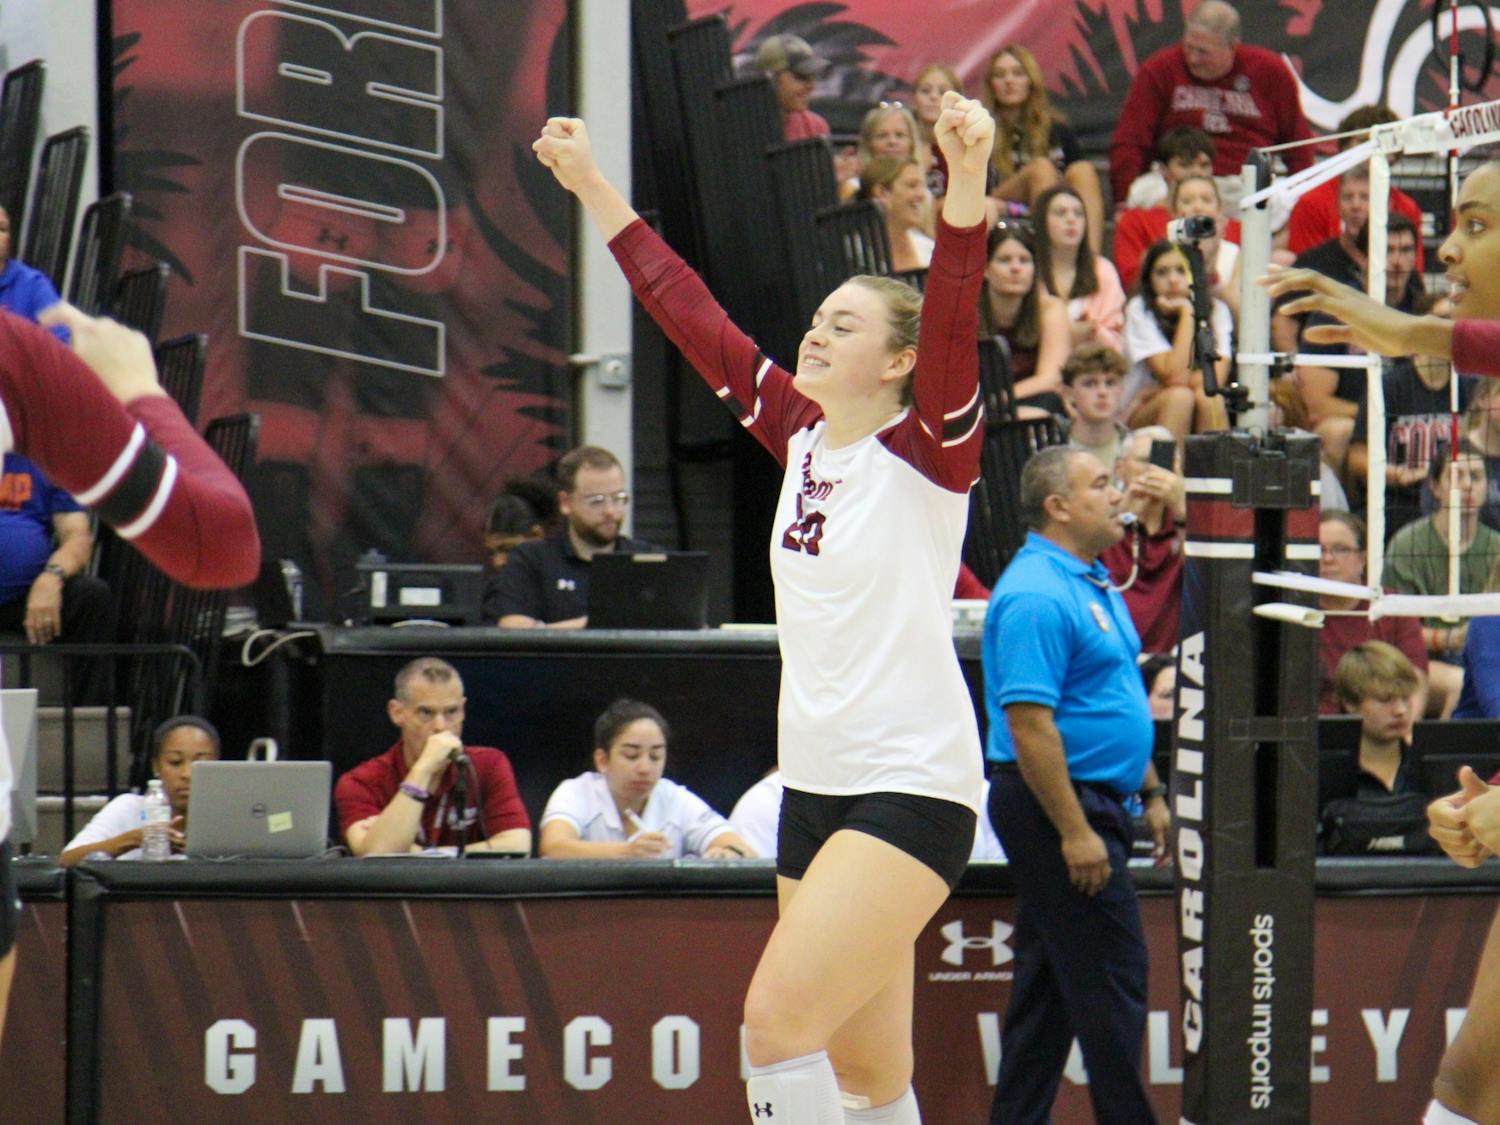 Junior outside hitter Riley Whitesides celebrates after winning a rally against Florida on Sept. 25, 2022.&nbsp;